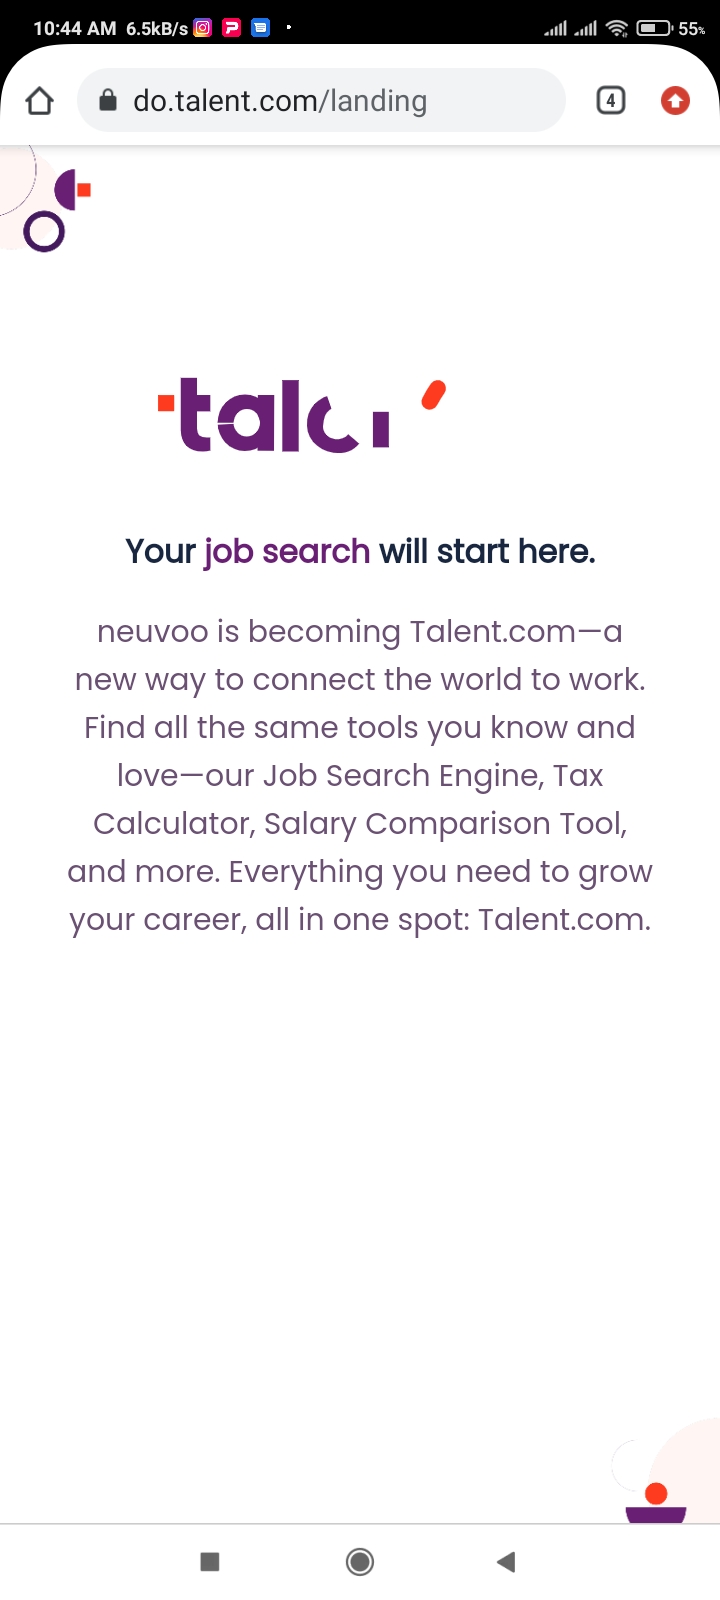 LR ER VURCRTC TESS all ll F @ 55+

() #& do.talent.com/landing ® ©

¢
Oo

‘talc’

Your job search will start here.

neuvoo is becoming Talent.com—a
new way to connect the world to work.
Find all the same tools you know and
love—our Job Search Engine, Tax
Calculator, Salary Comparison Tool,
and more. Everything you need to grow
your career, all in one spot: Talent.com.